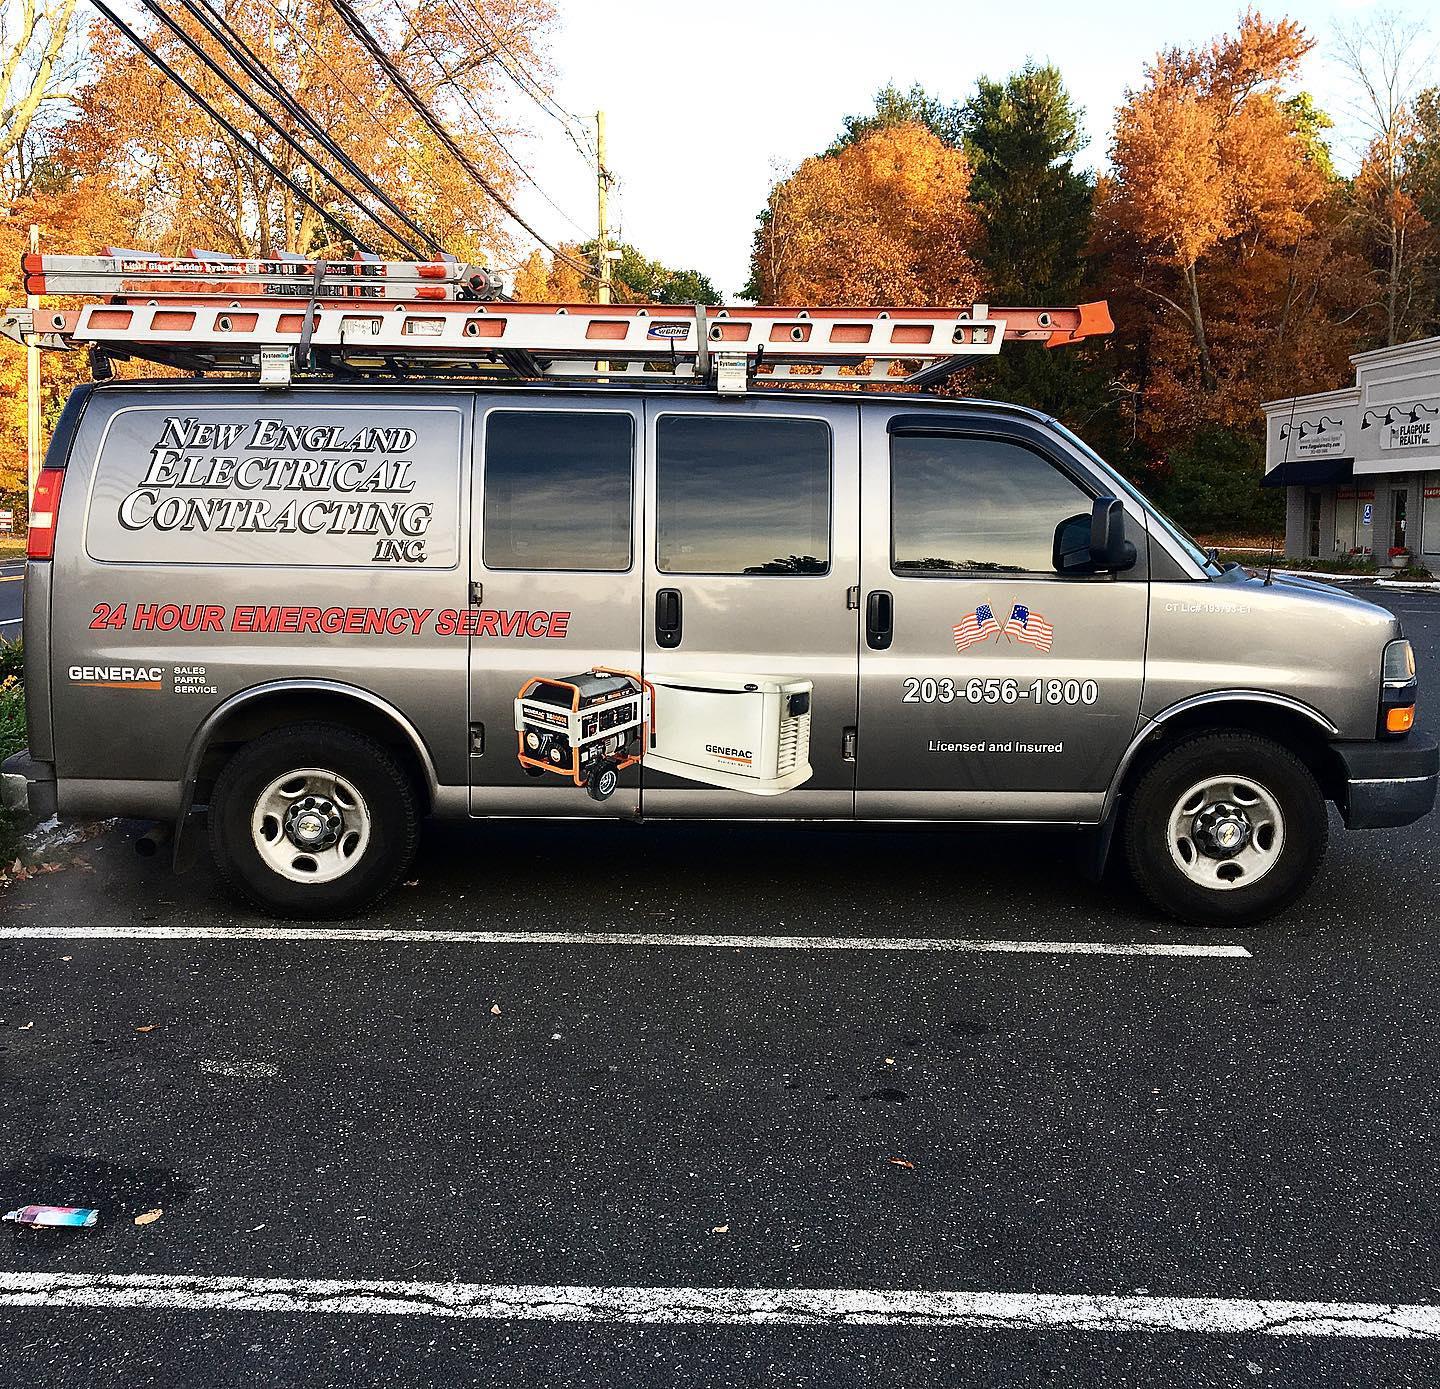 New England Electrical Contracting, Inc. - Newtown, CT 06470 - (203)656-1800 | ShowMeLocal.com